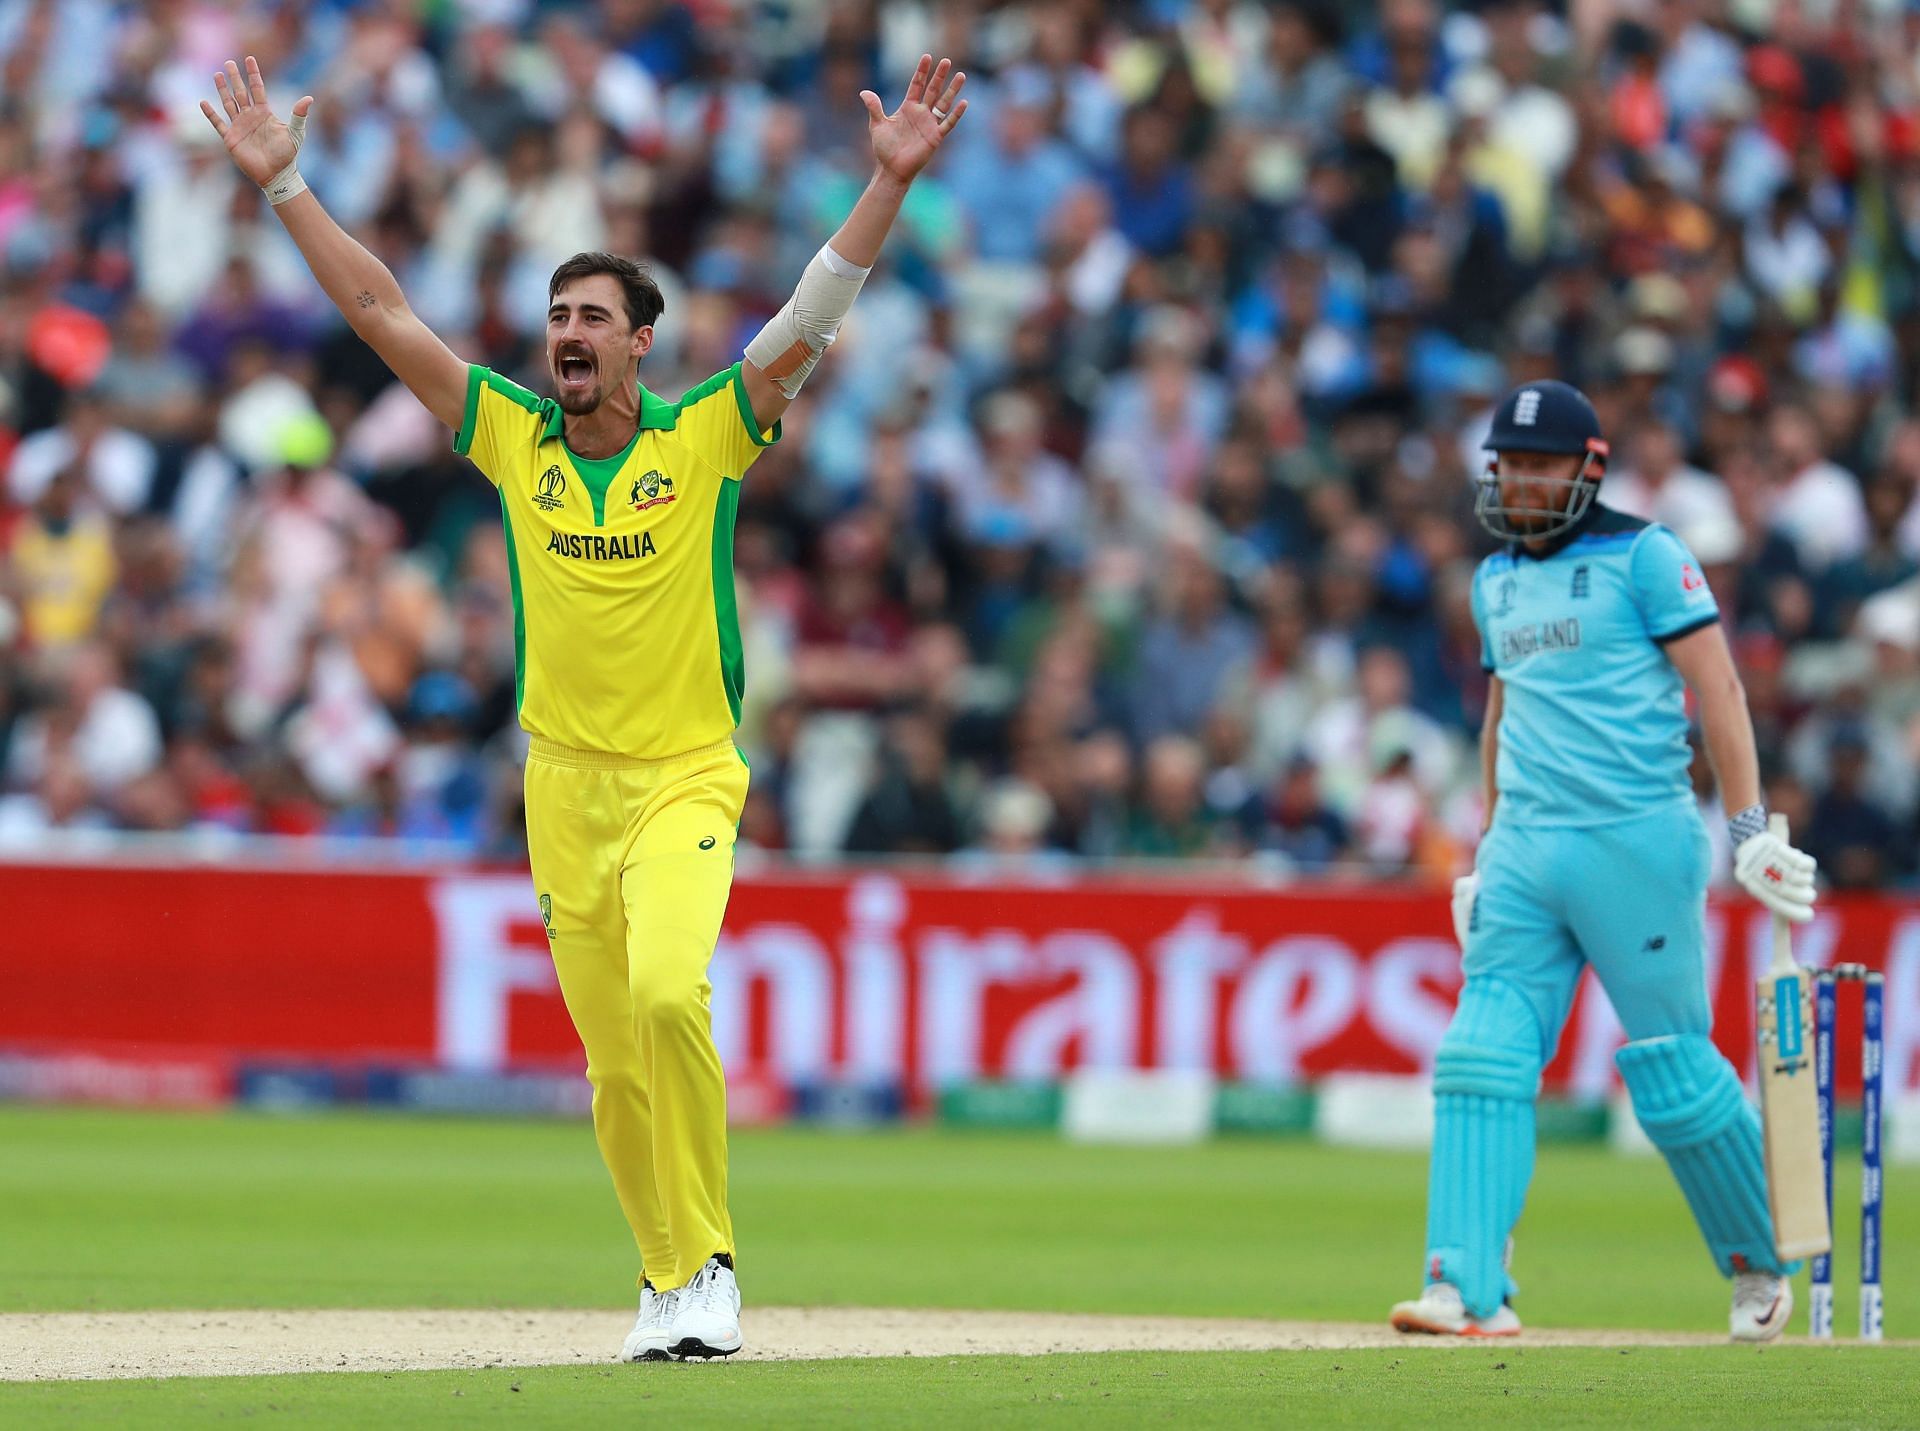 Mitchell Starc has a brilliant record in the ODI World Cup. (Pic: Getty Images)